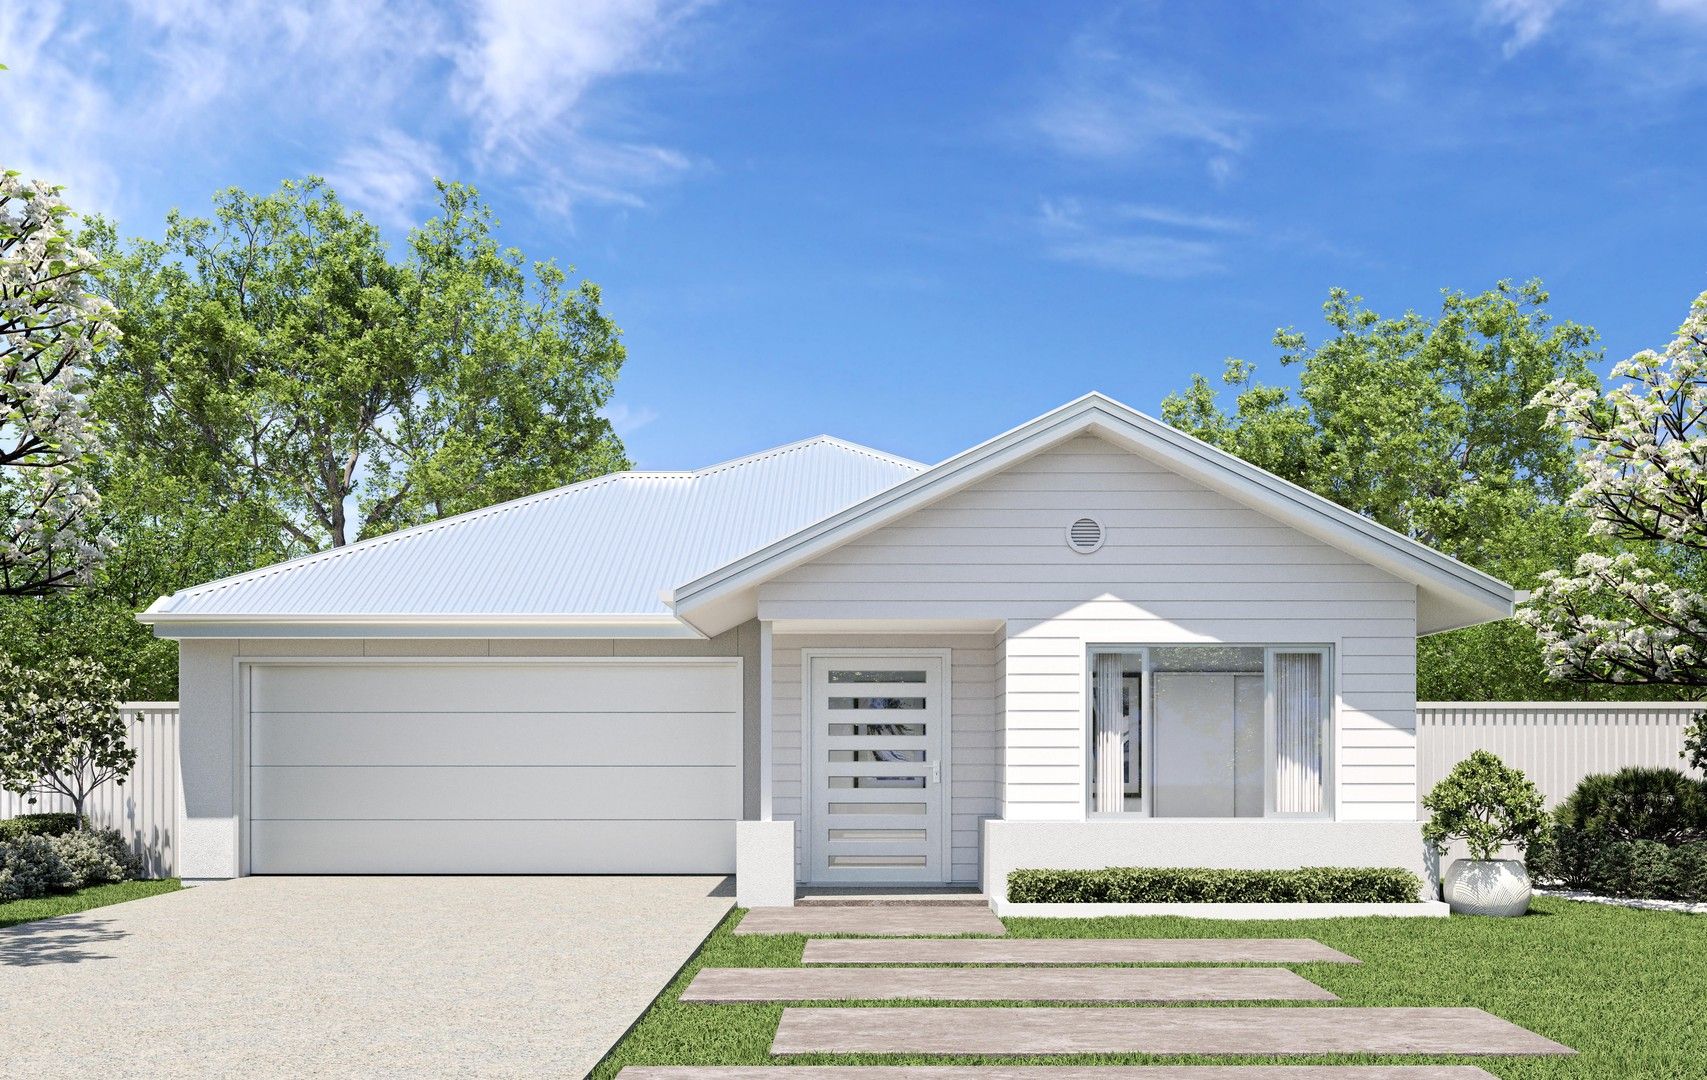 4 bedrooms New House & Land in Lot 1461 New Road CABOOLTURE SOUTH QLD, 4510